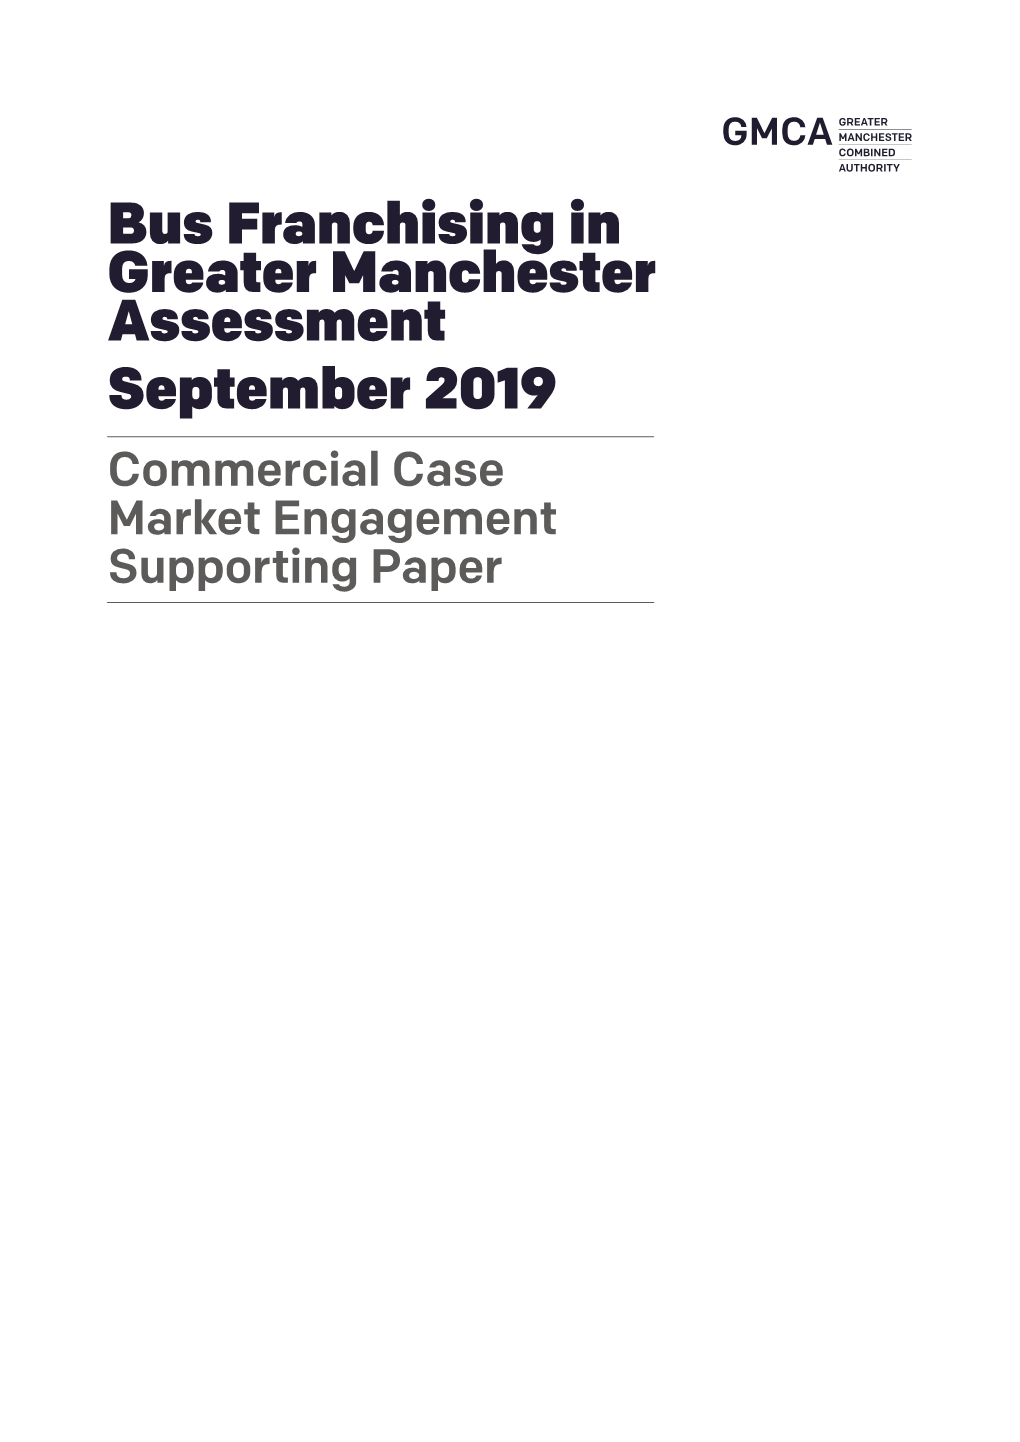 Bus Franchising in Greater Manchester Assessment September 2019 Commercial Case Market Engagement Supporting Paper